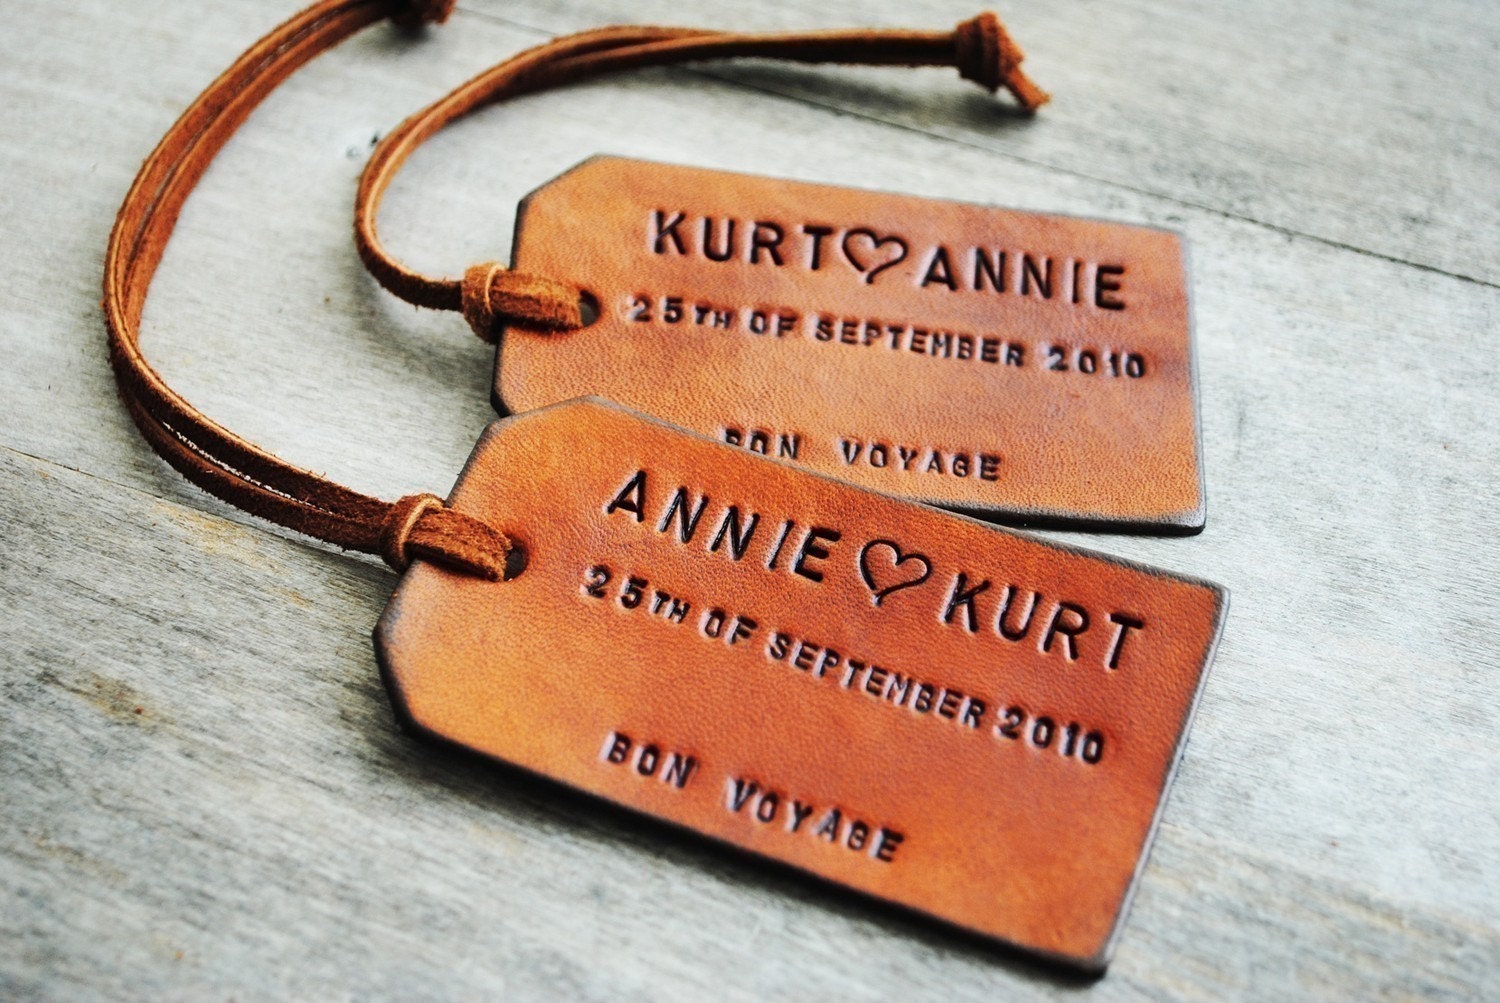 2 Custom Leather Luggage Tags - Up to 4 lines - Unique Gift for Boyfriends, Husbands, Brothers, 2011 Graduation, Fathers Day, or Summer Vacation Travel.